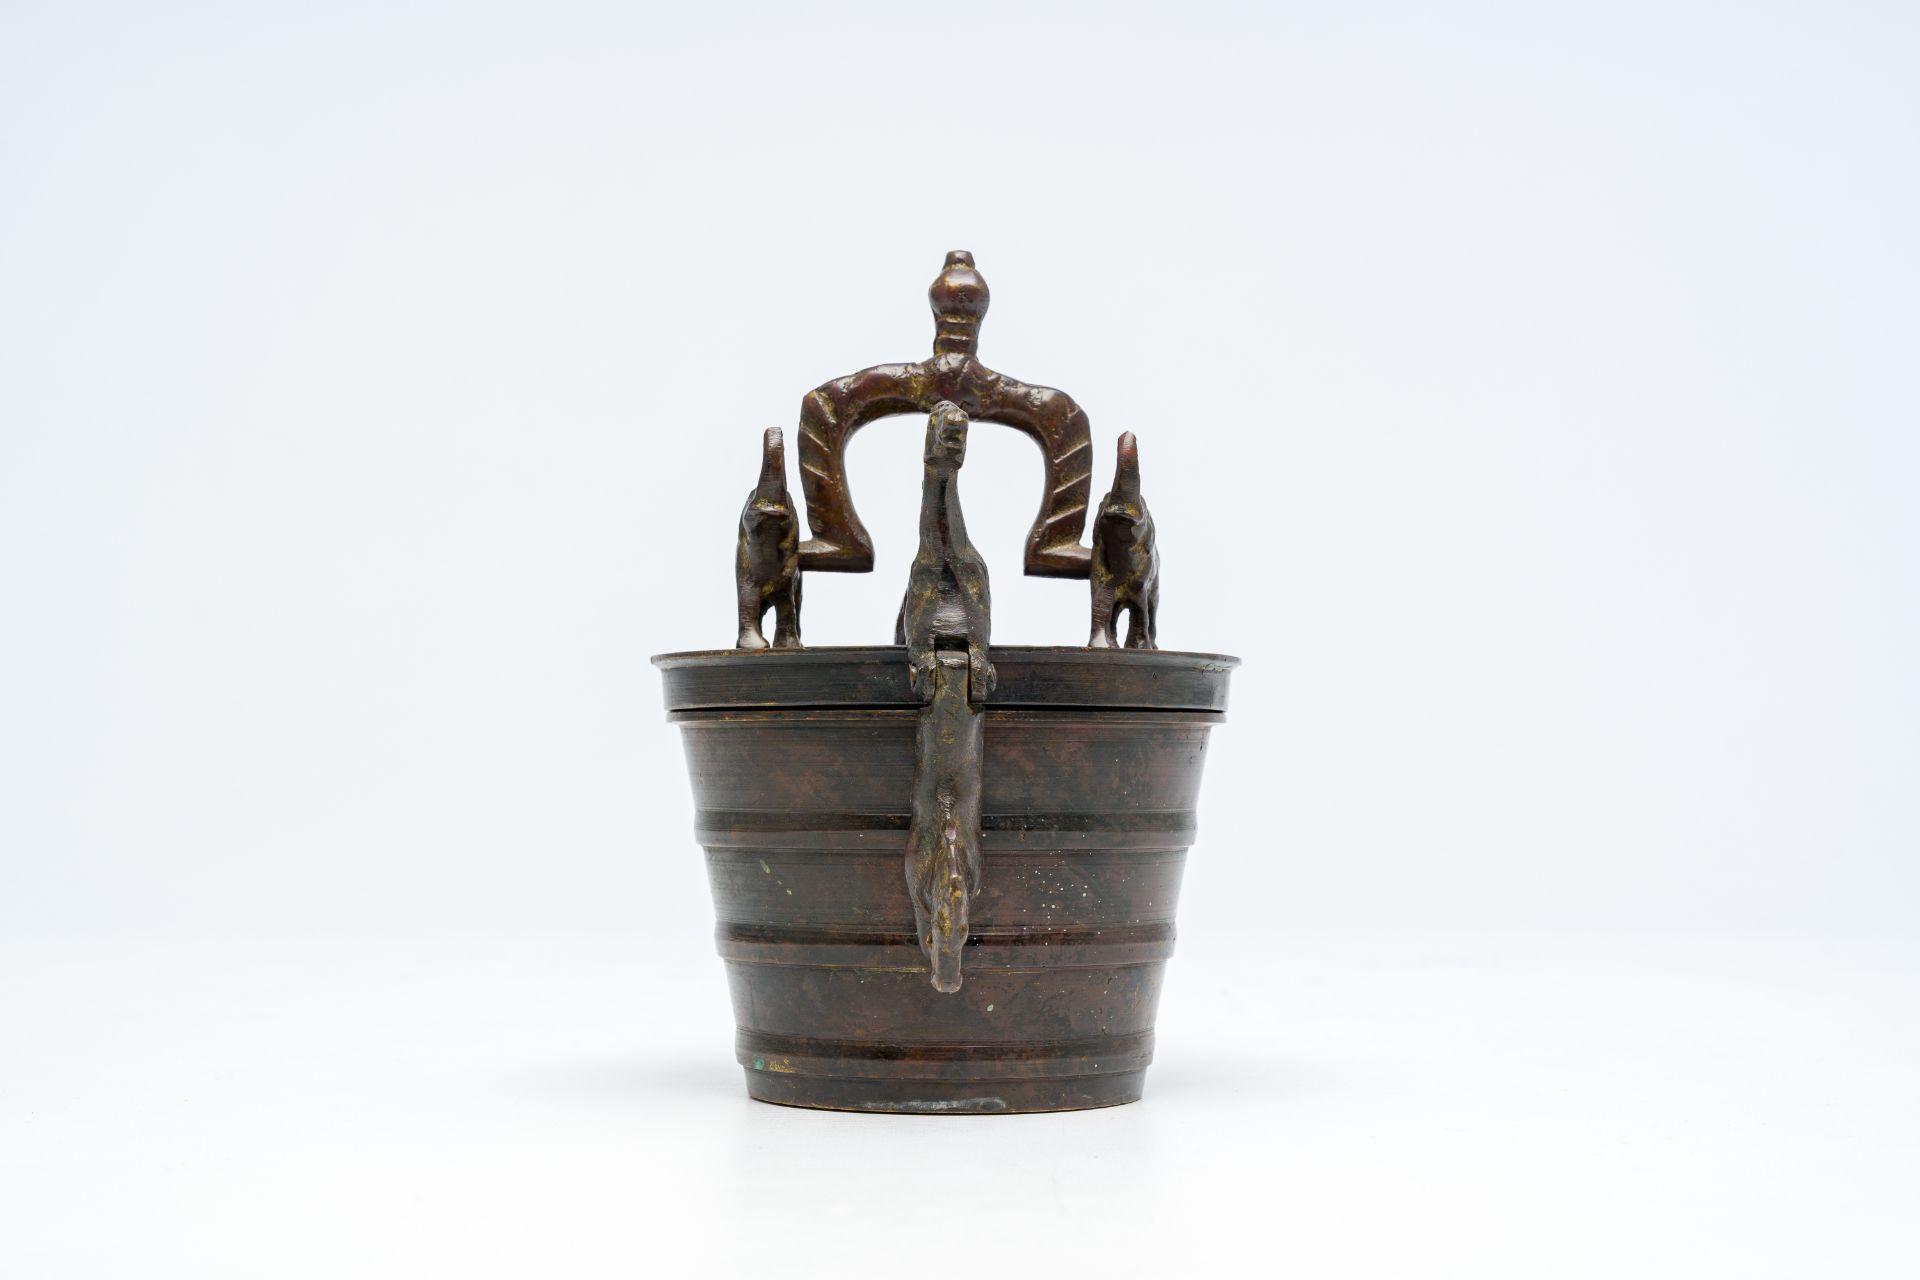 A set of bronze probably Portuguese colonial Nuremberg style nesting weights, ca. 1900 - Image 5 of 13